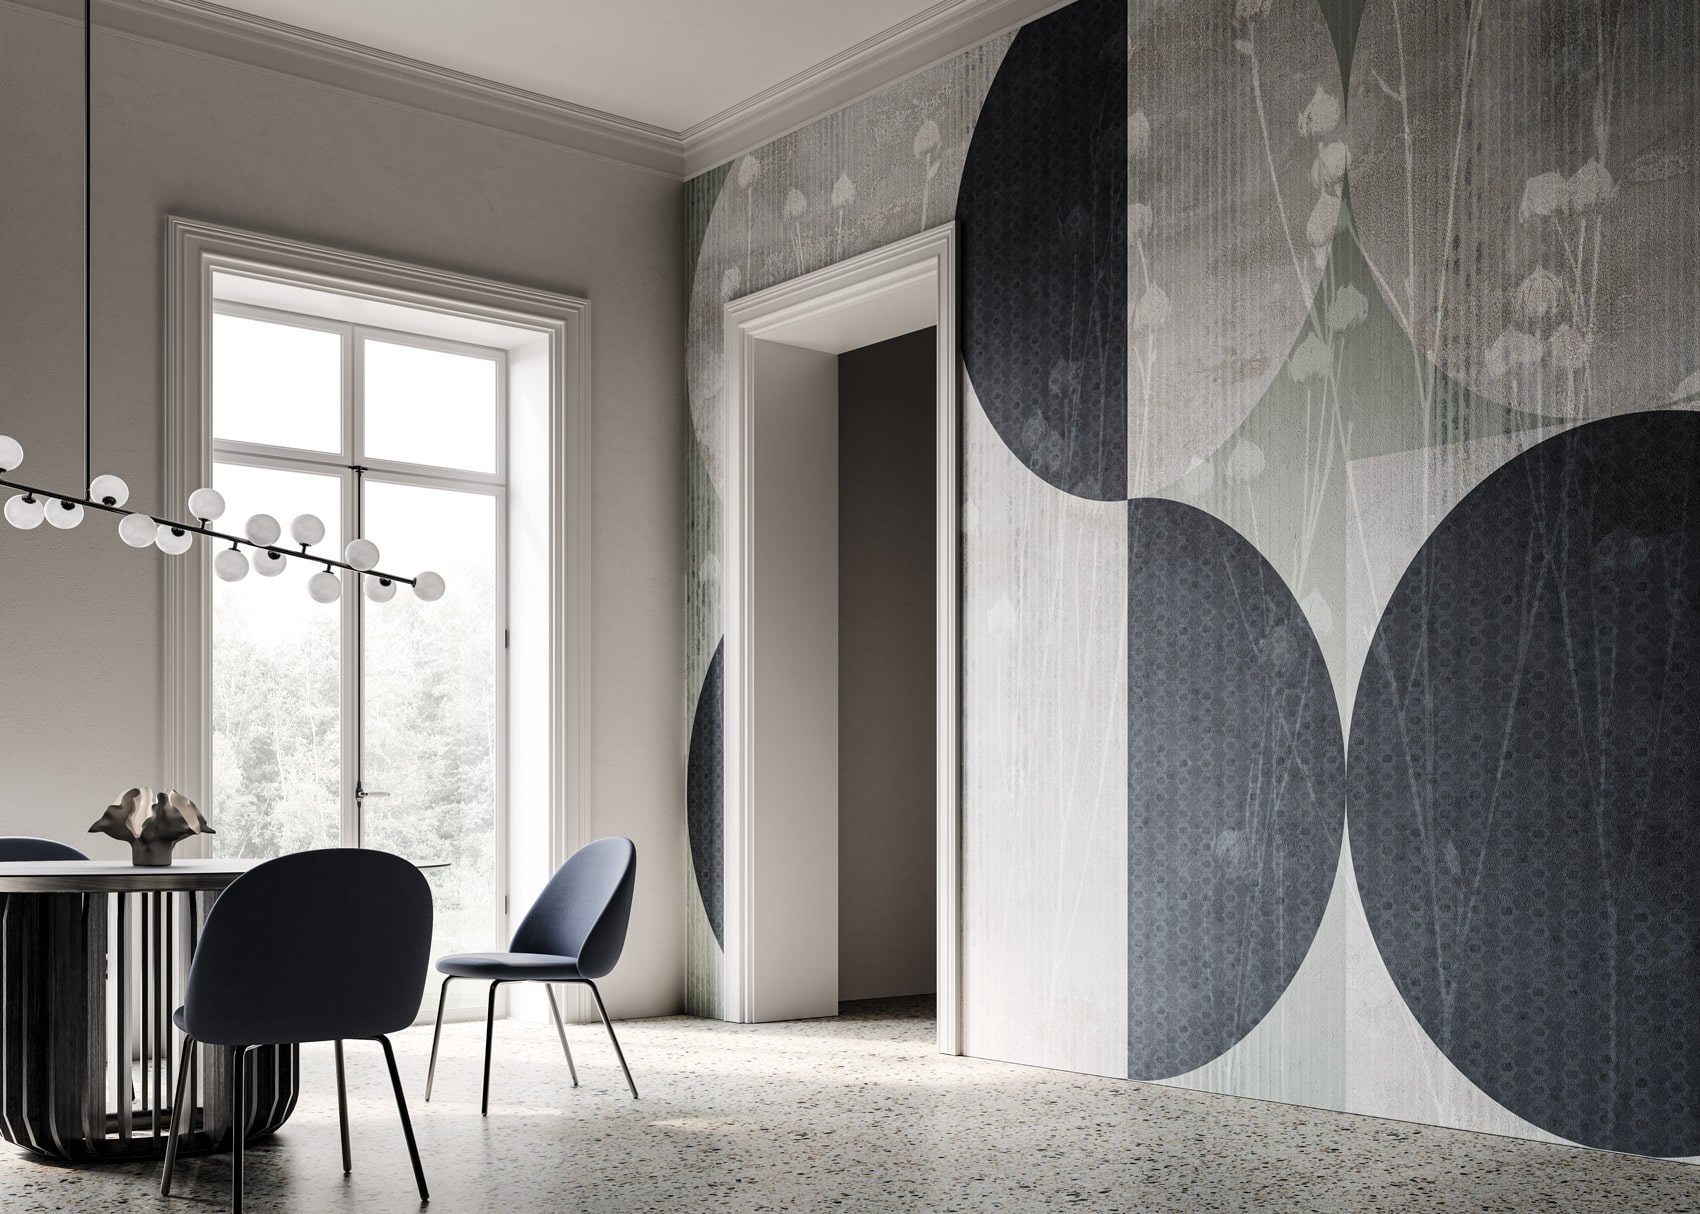 enThe Instabilelab Modern Wallpaper revolution with style, luxury and elegance the interior design. Discover the refined collections.